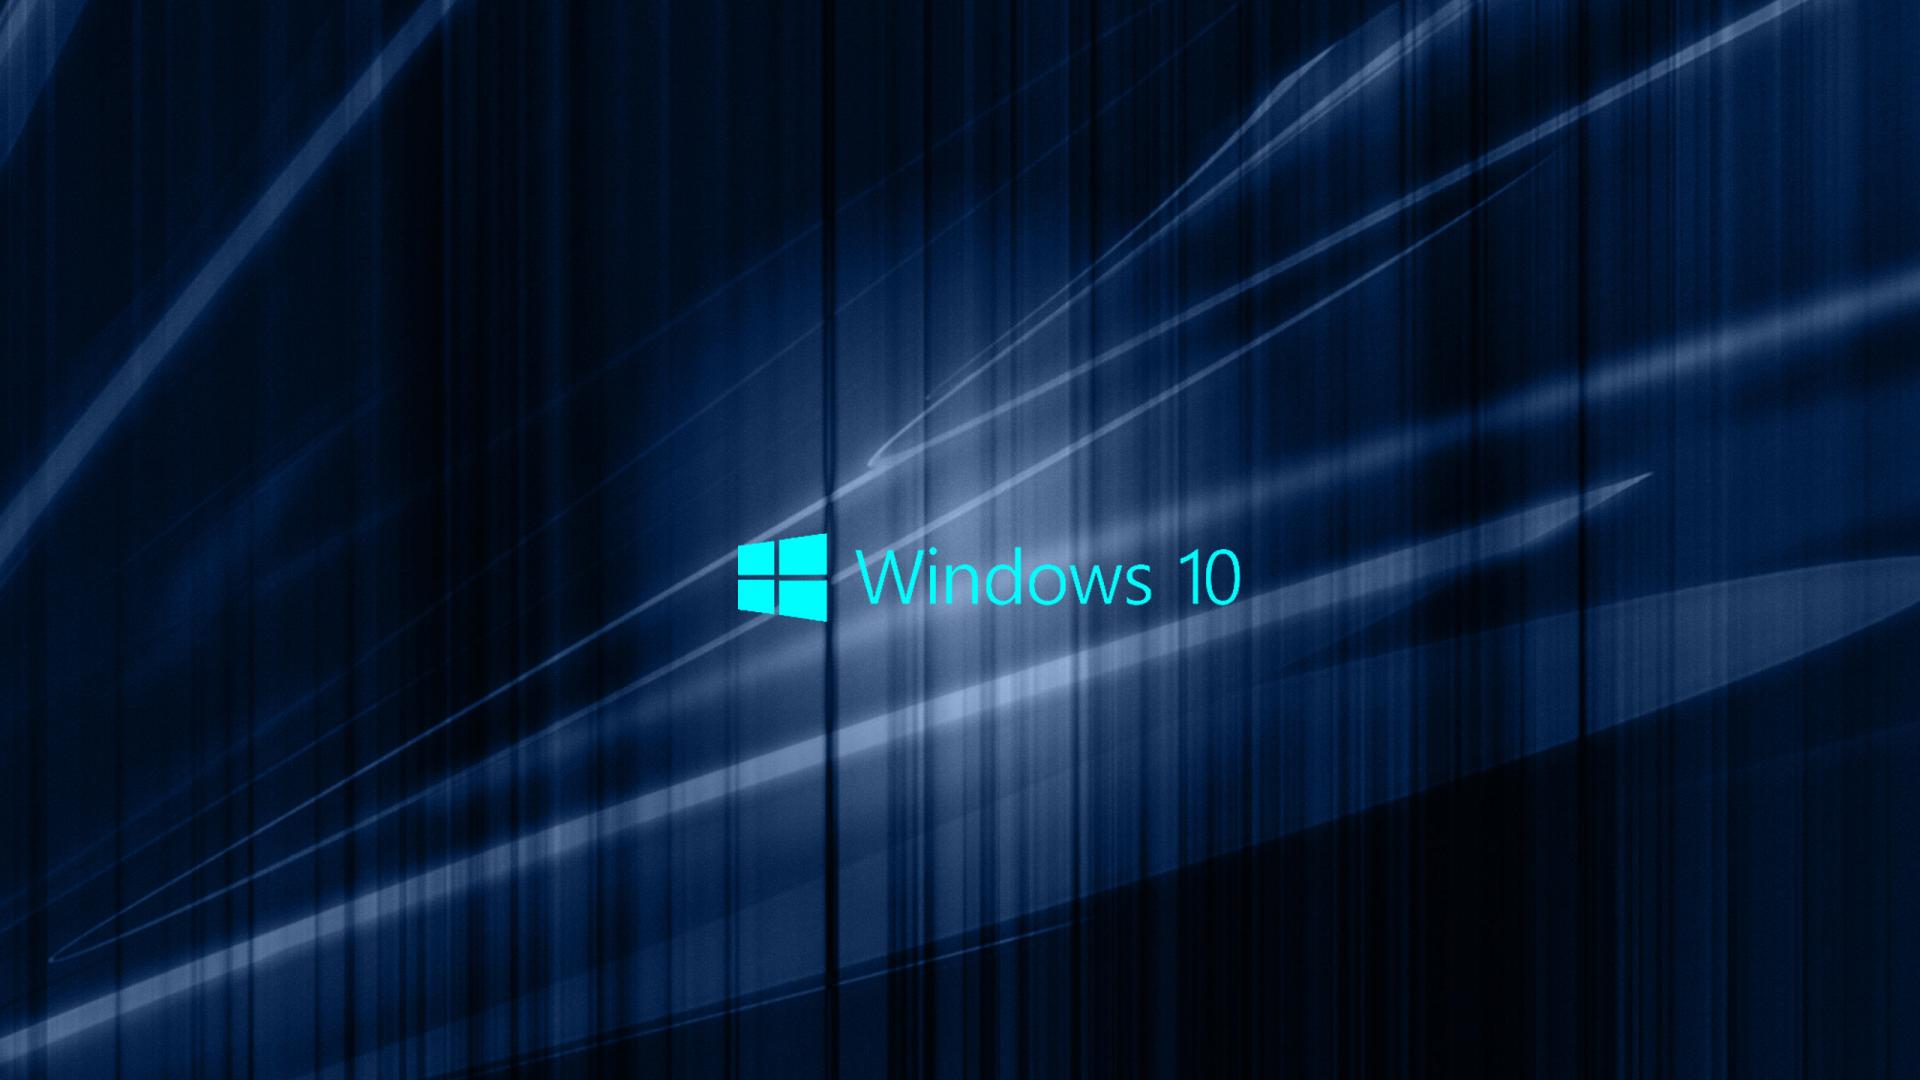 Windows 10 Wallpaper with Blue Abstract Waves HD Wallpapers for 1920x1080